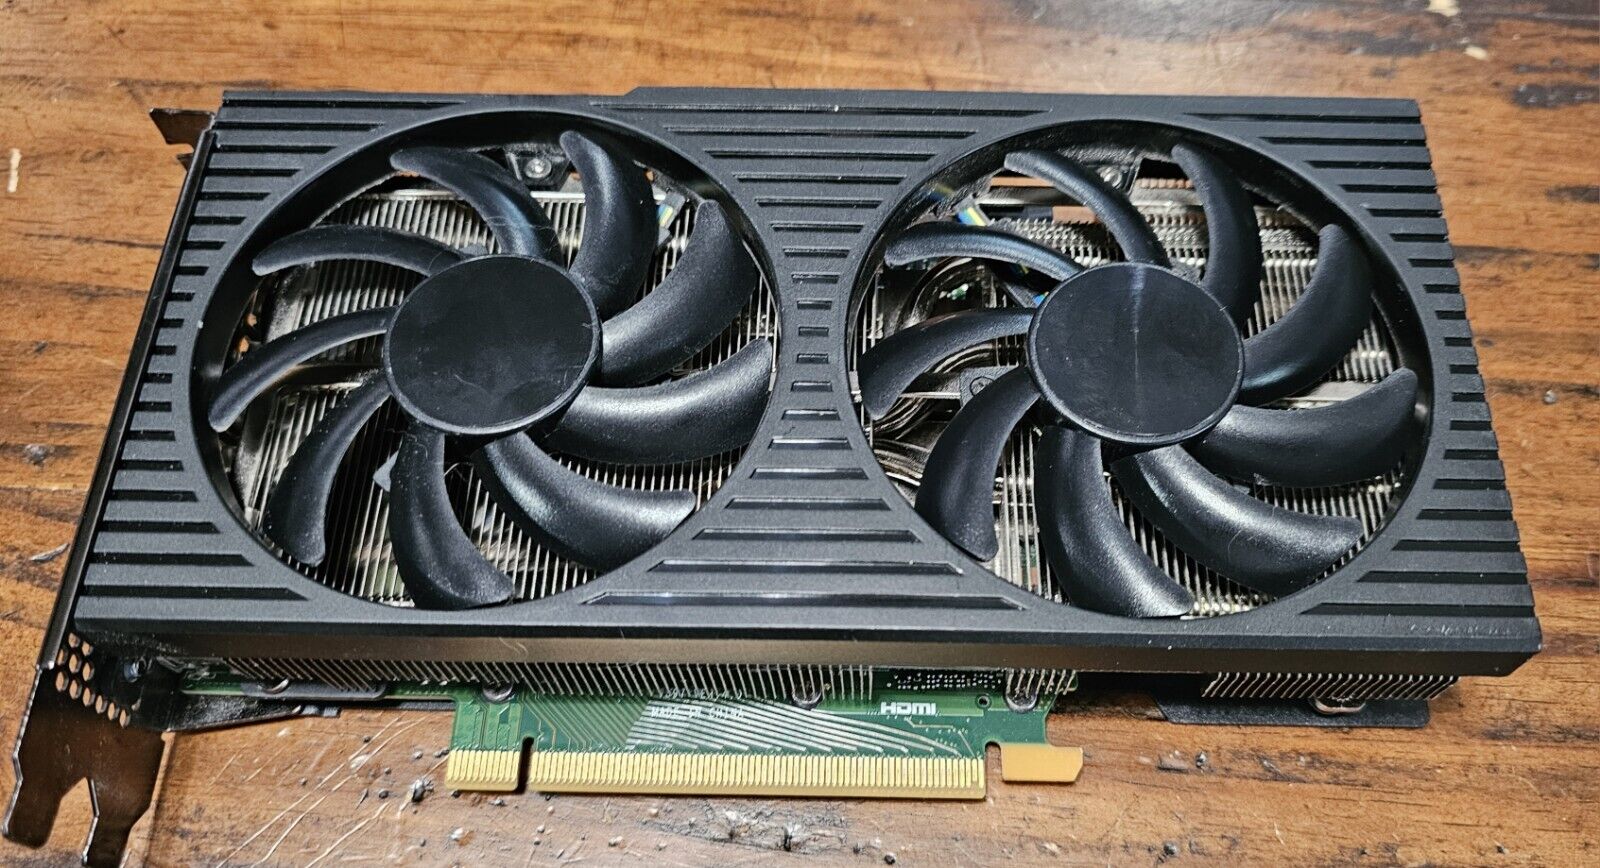 Oem Dell Rtx Geforce 3060 12gb Gddr6 GRAPHICS CARD[NEVERED MINED]